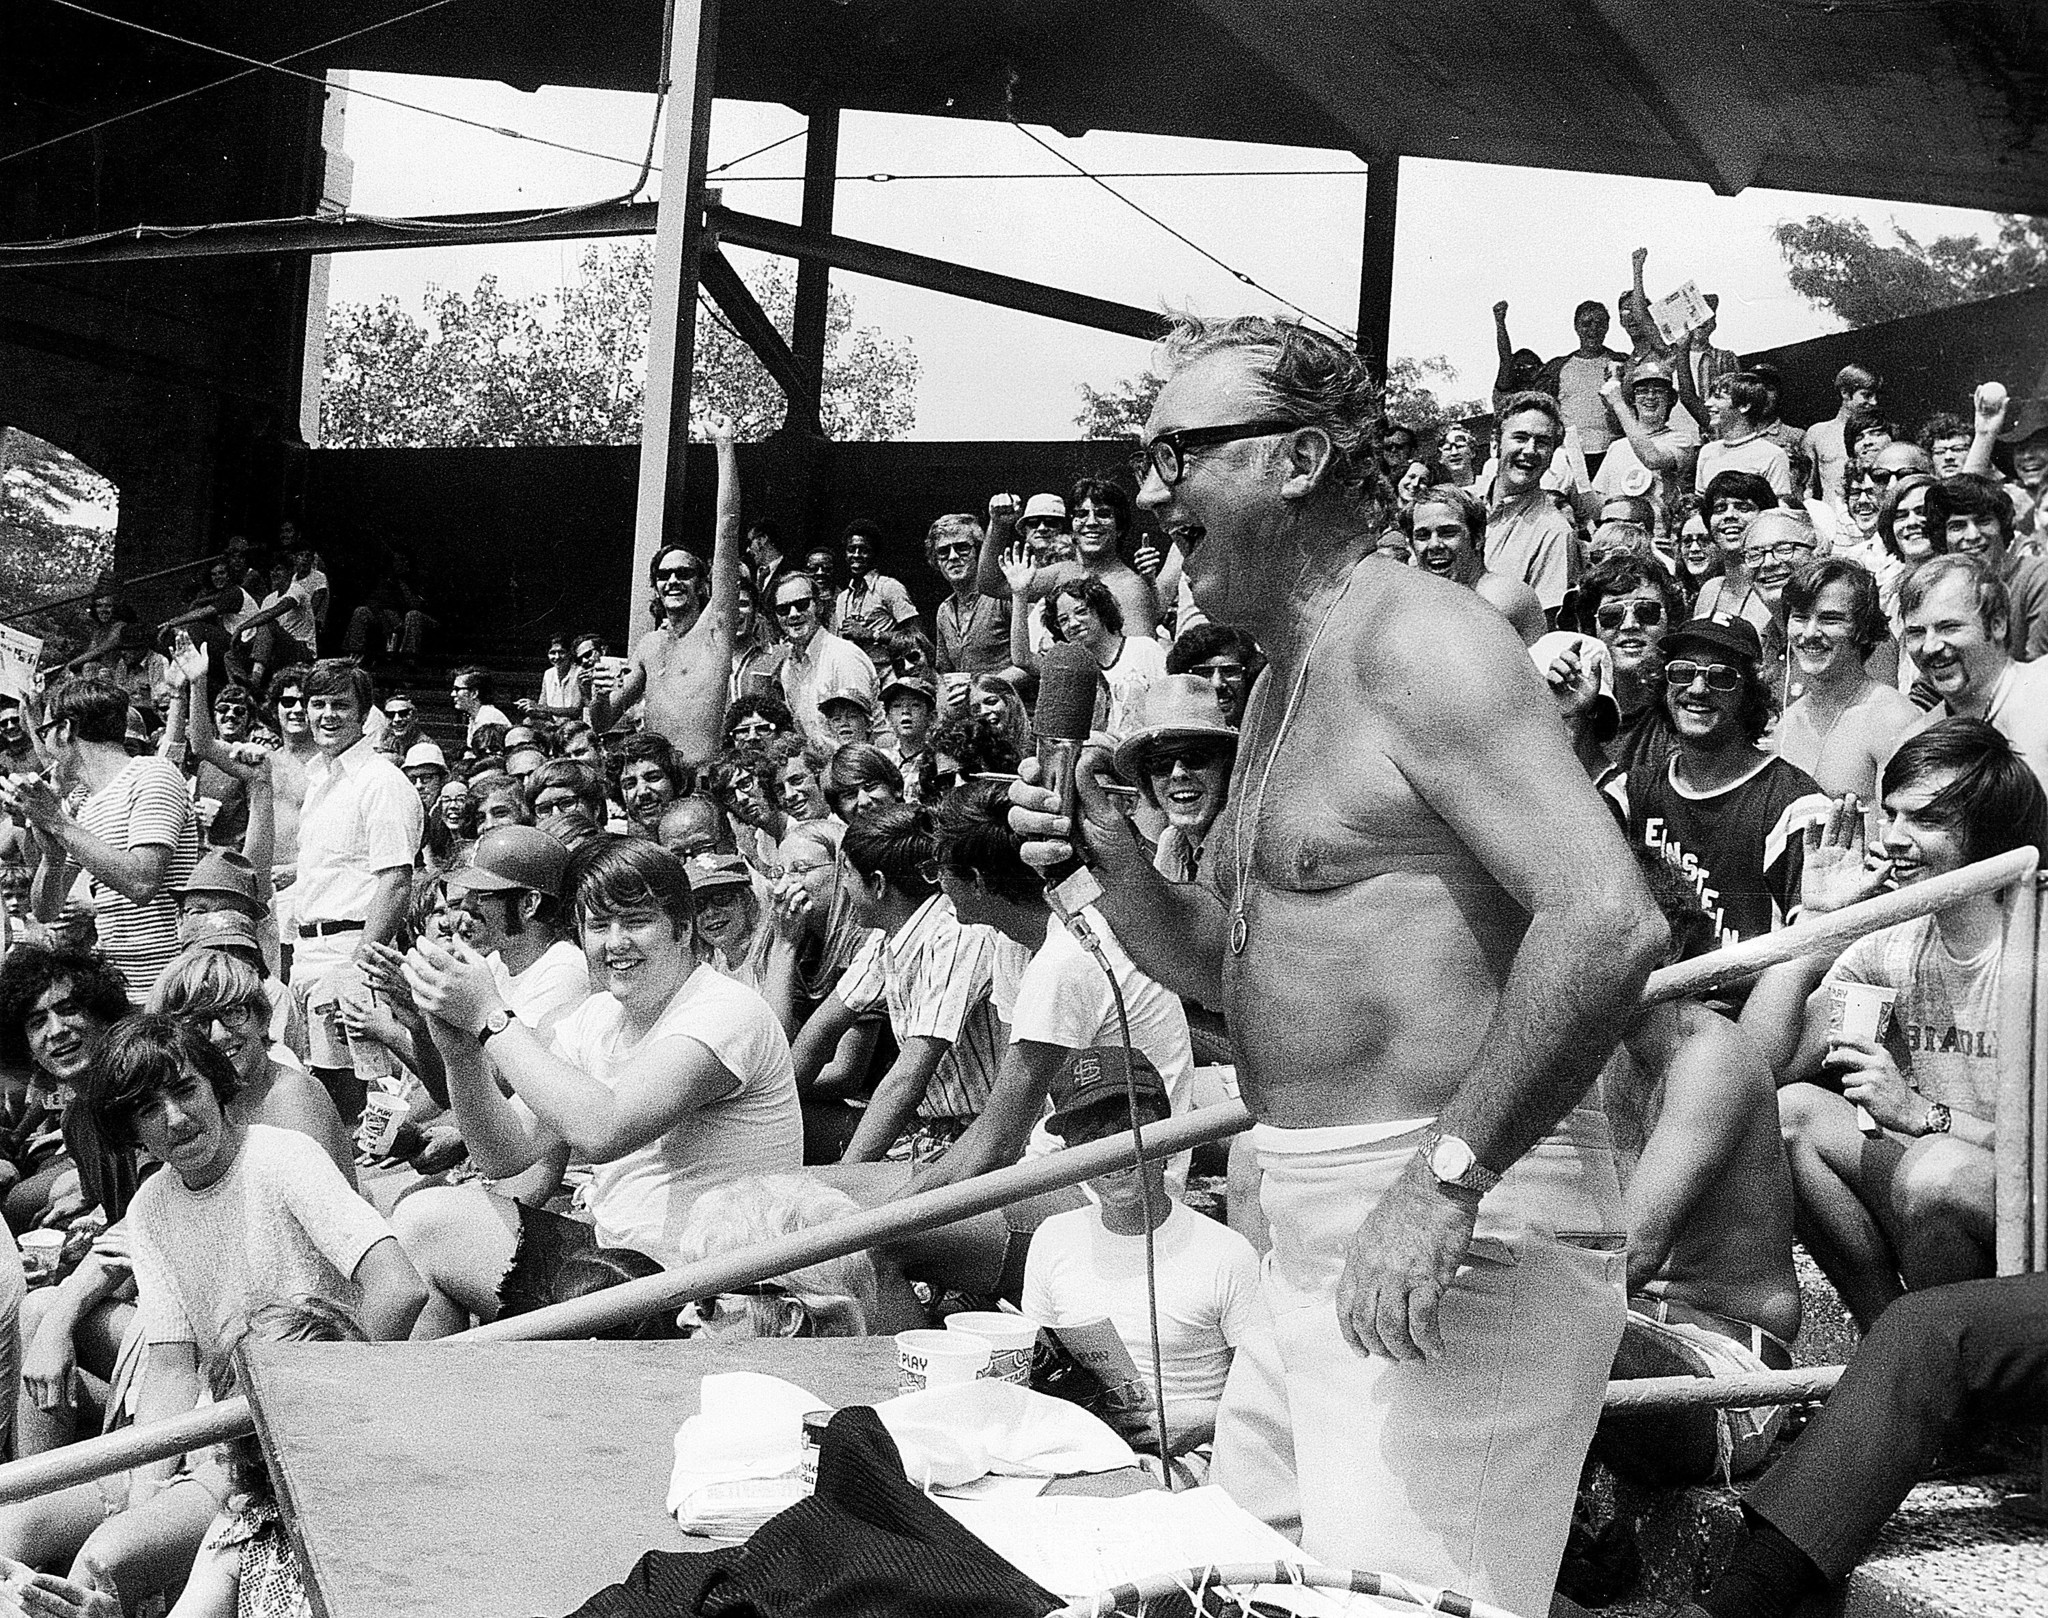 23 Years Ago Today, Harry Caray Led the Seventh Inning Stretch for